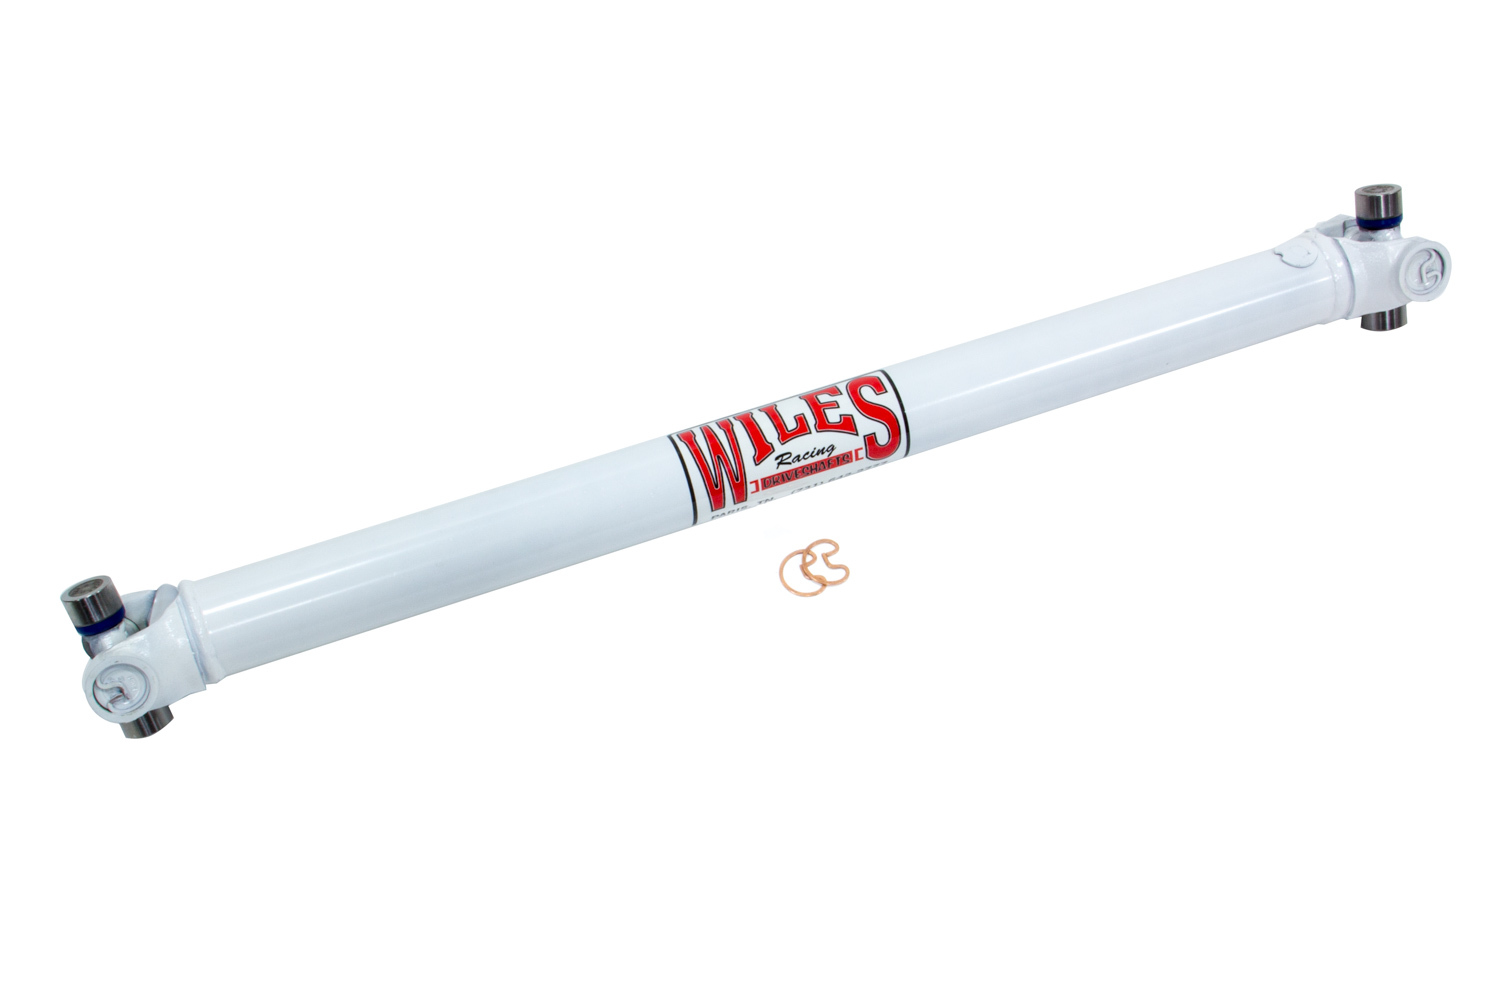 Wiles Driveshaft S283325 Drive Shaft, 32.500 in Long, 2 in OD, 1310 U-Joints, Steel, White Paint, Universal, Each